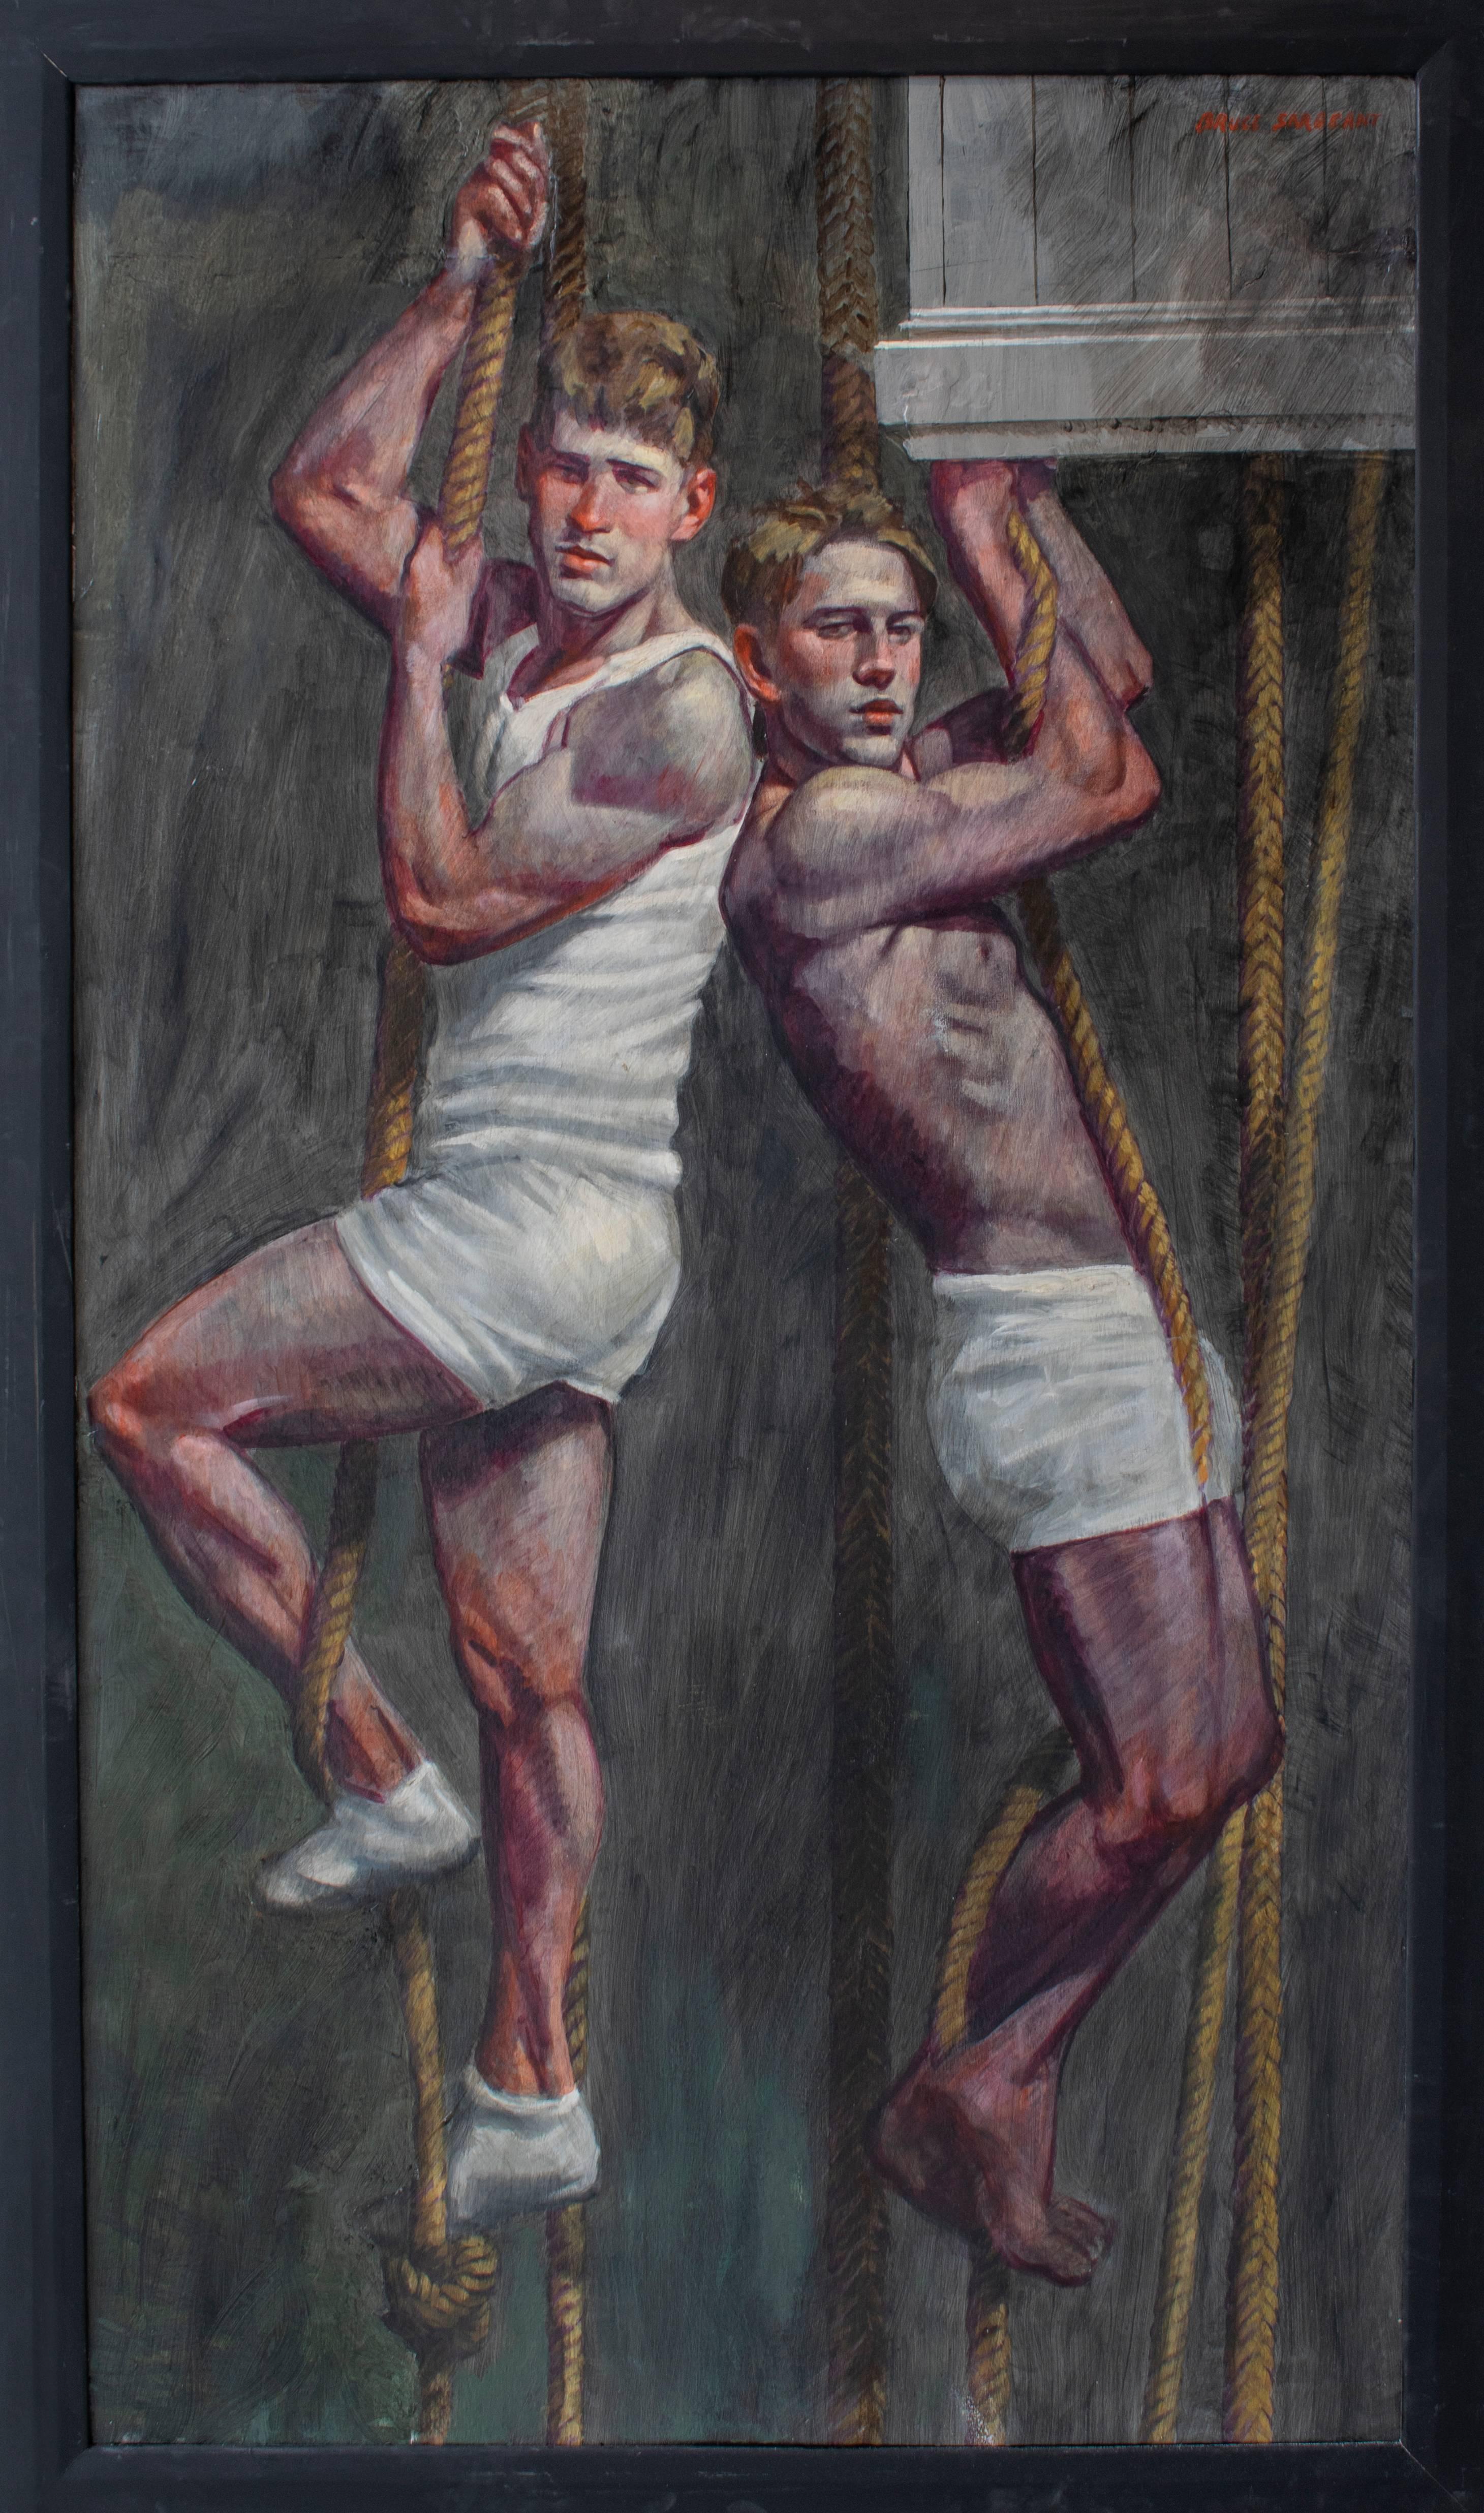 Academic style figurative painting of athletic male models climbing ropes by Mark Beard
oil on canvas mounted on panel
71.5 x 42.5 inches, 81 x 48 inches framed

This modern figurative painting on canvas of two athletes climbing gym ropes was